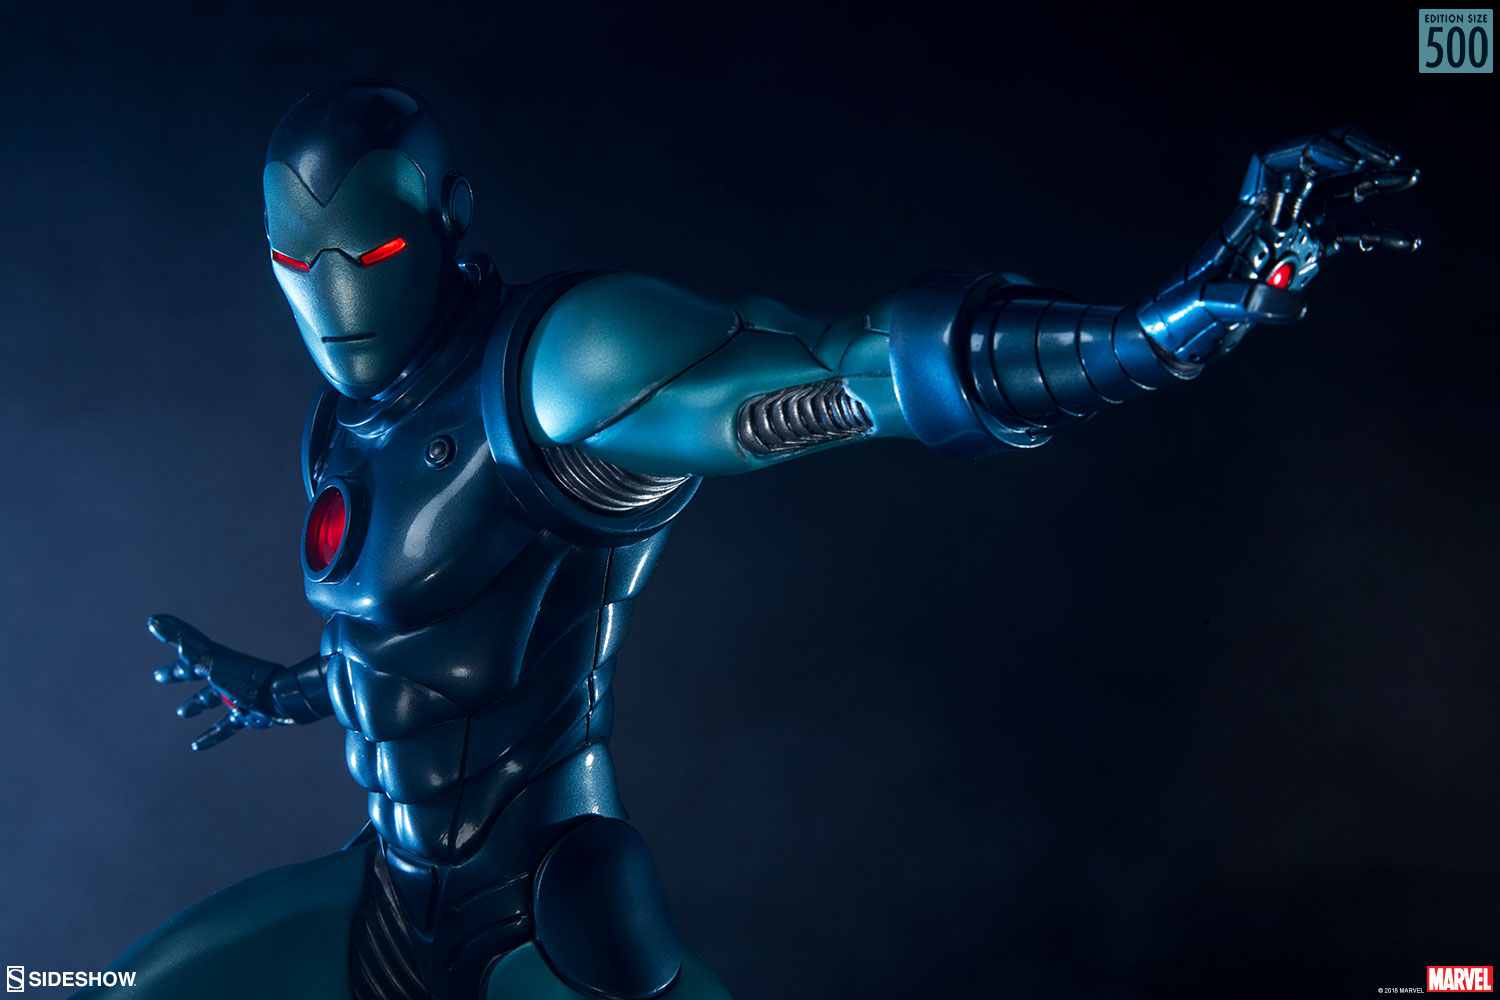 Marvel Iron Man Stealth Suit Statue By Sideshow Collectibles Sideshow Collectibles